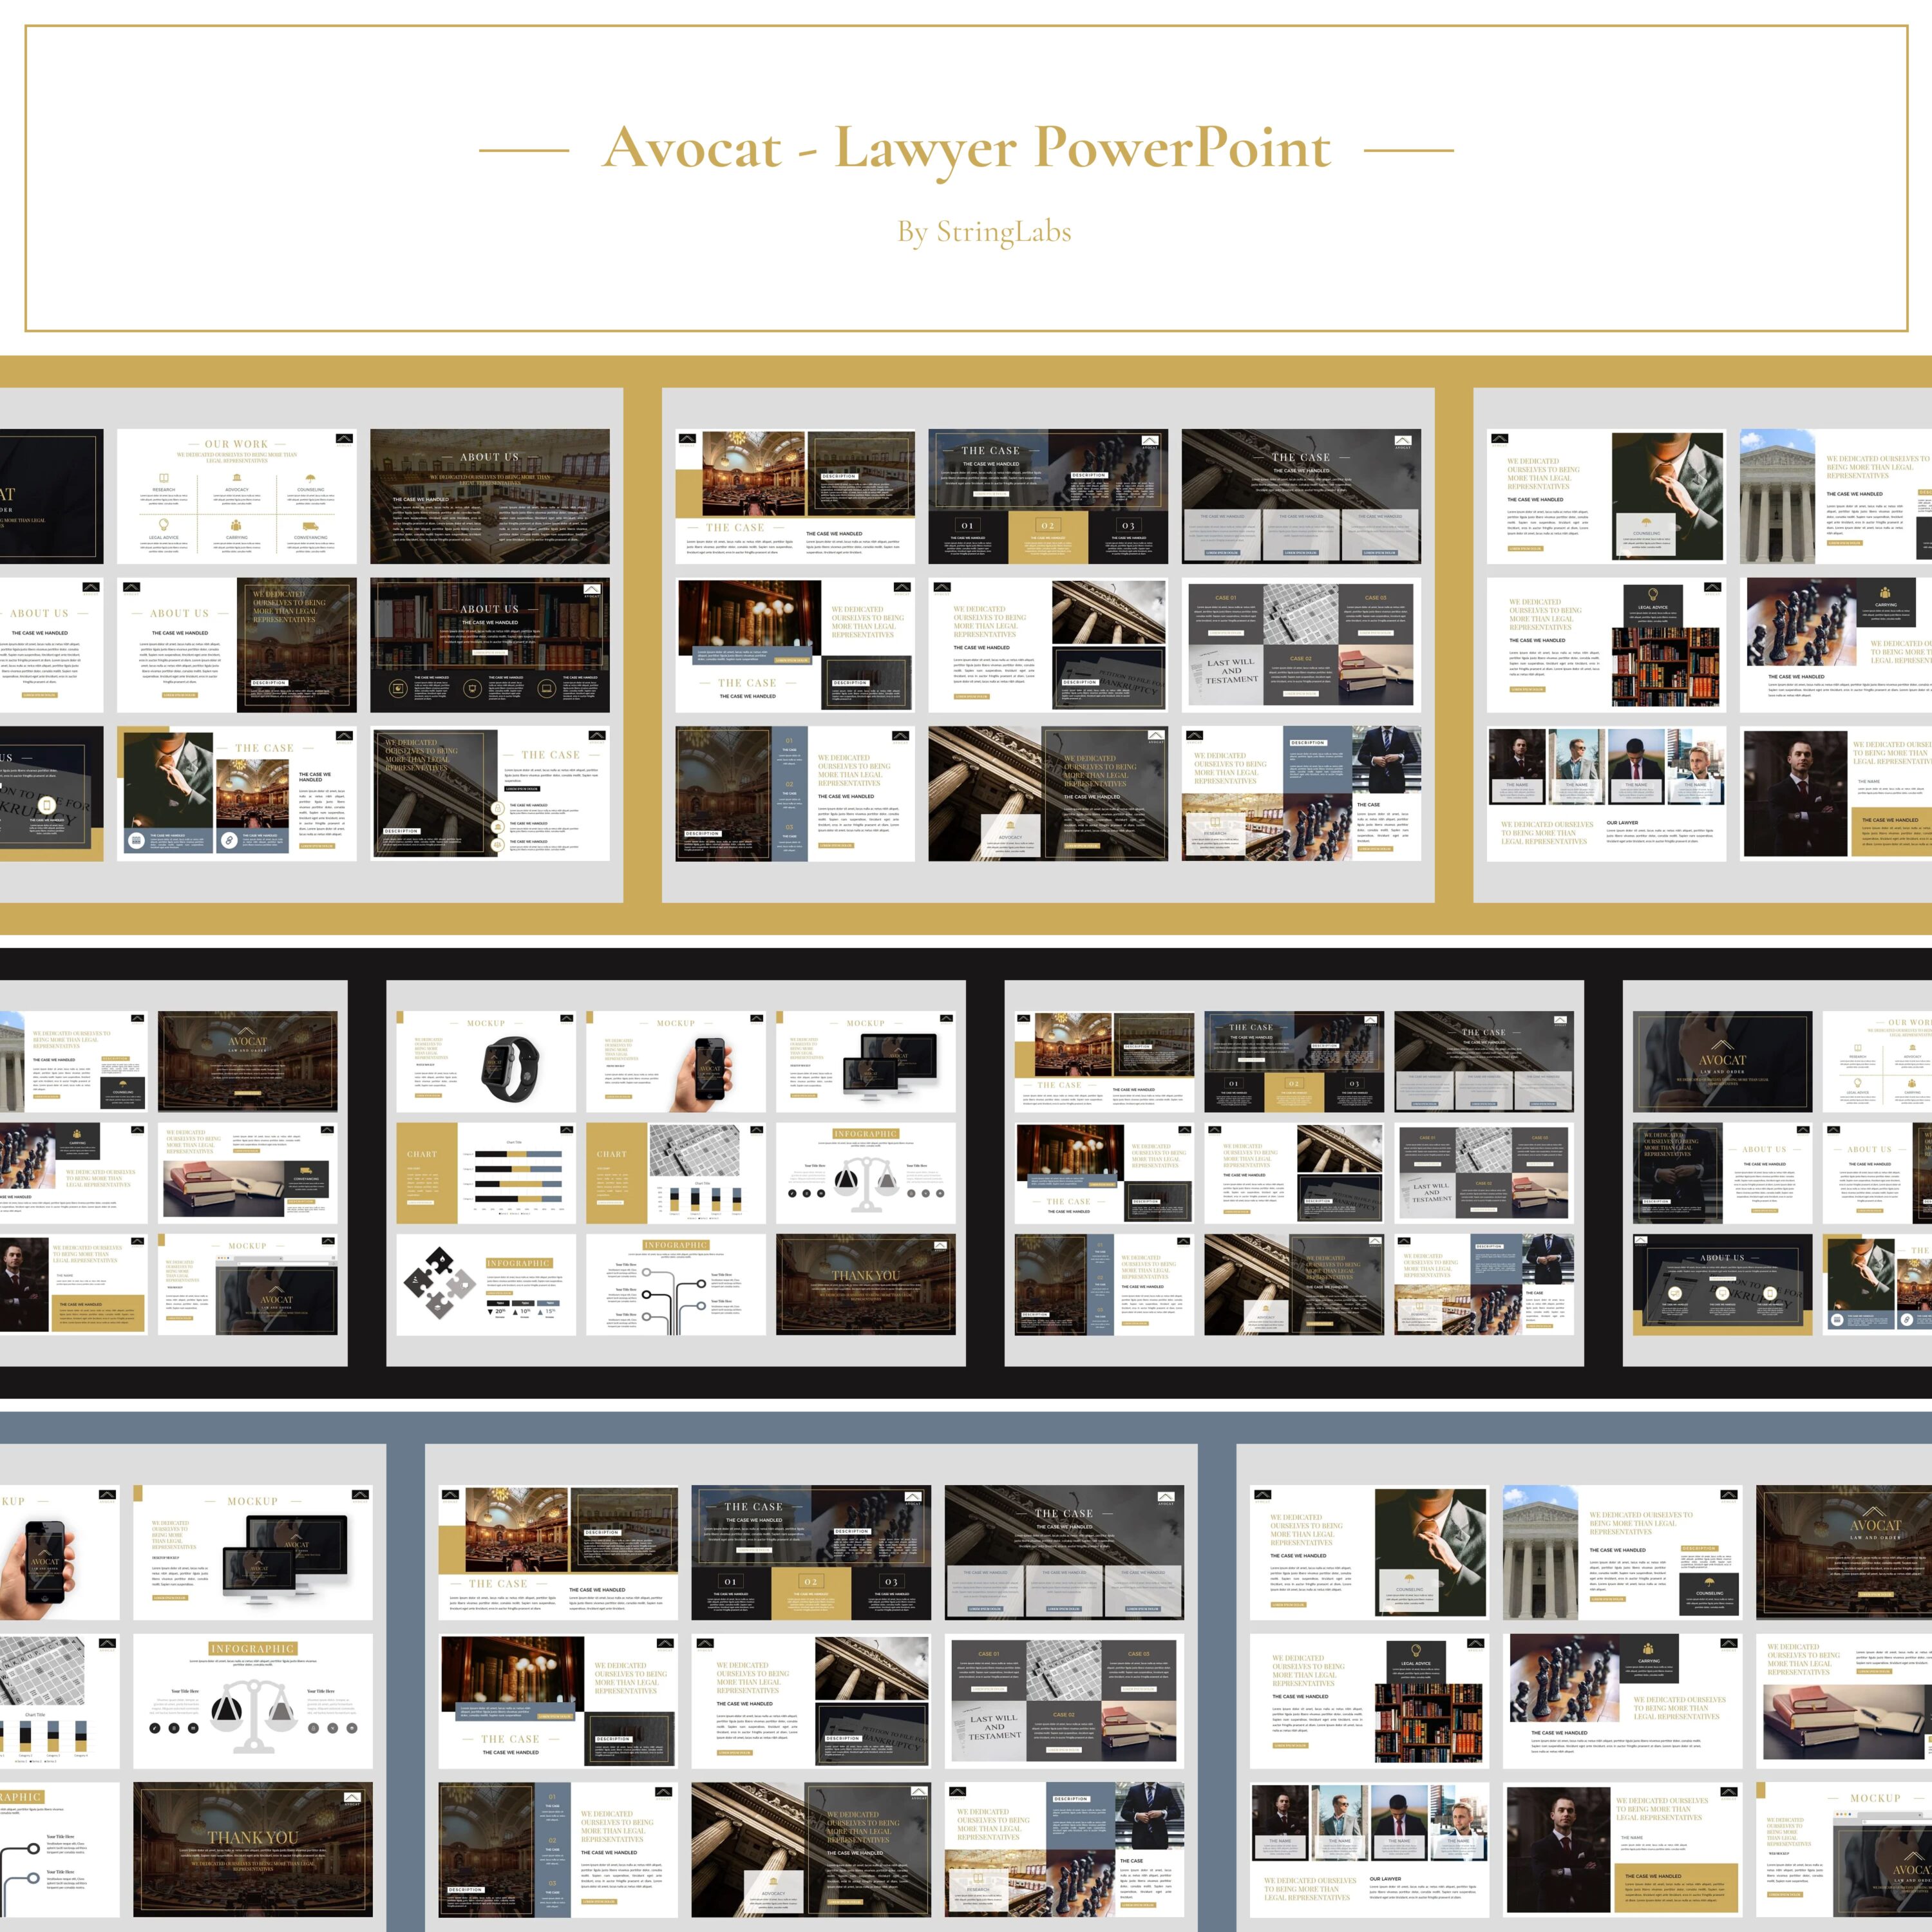 Avocat - Lawyer PowerPoint cover.